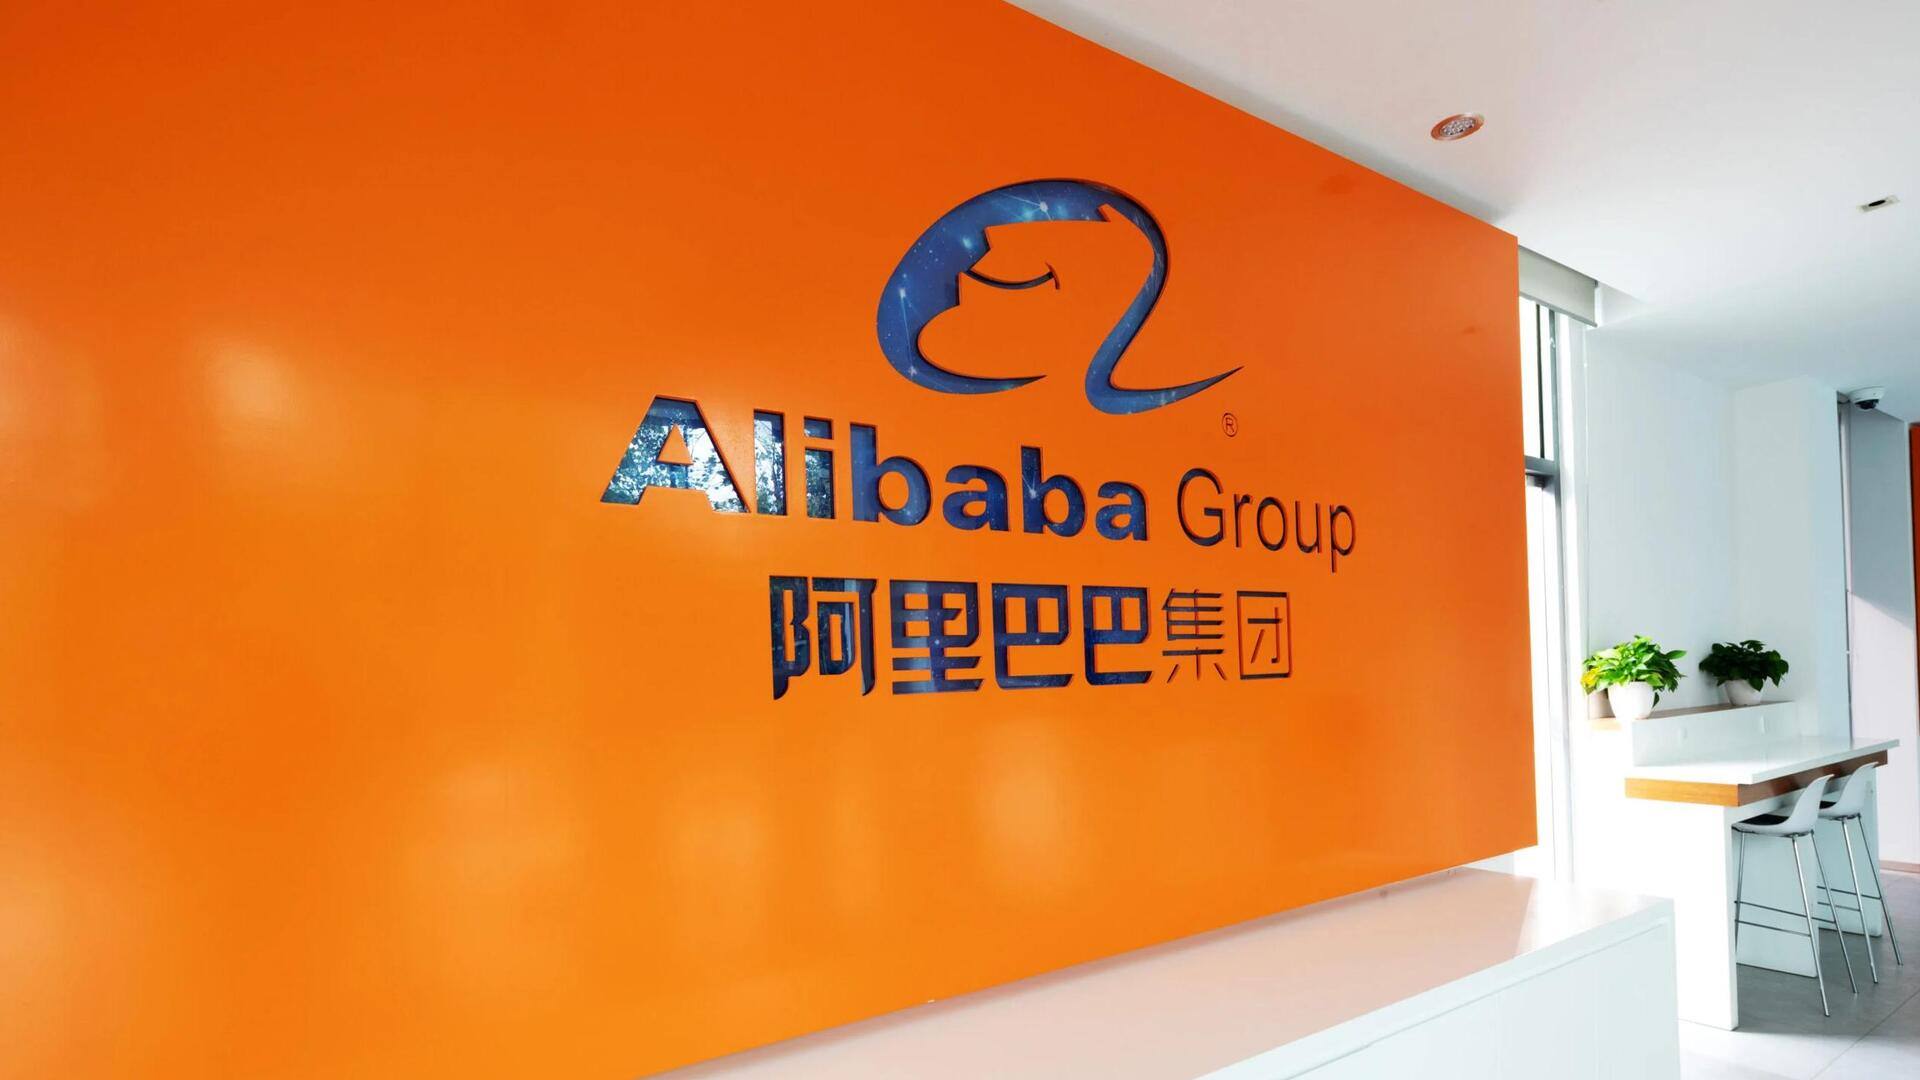 Alibaba shares crash 4% as former CEO quits cloud business